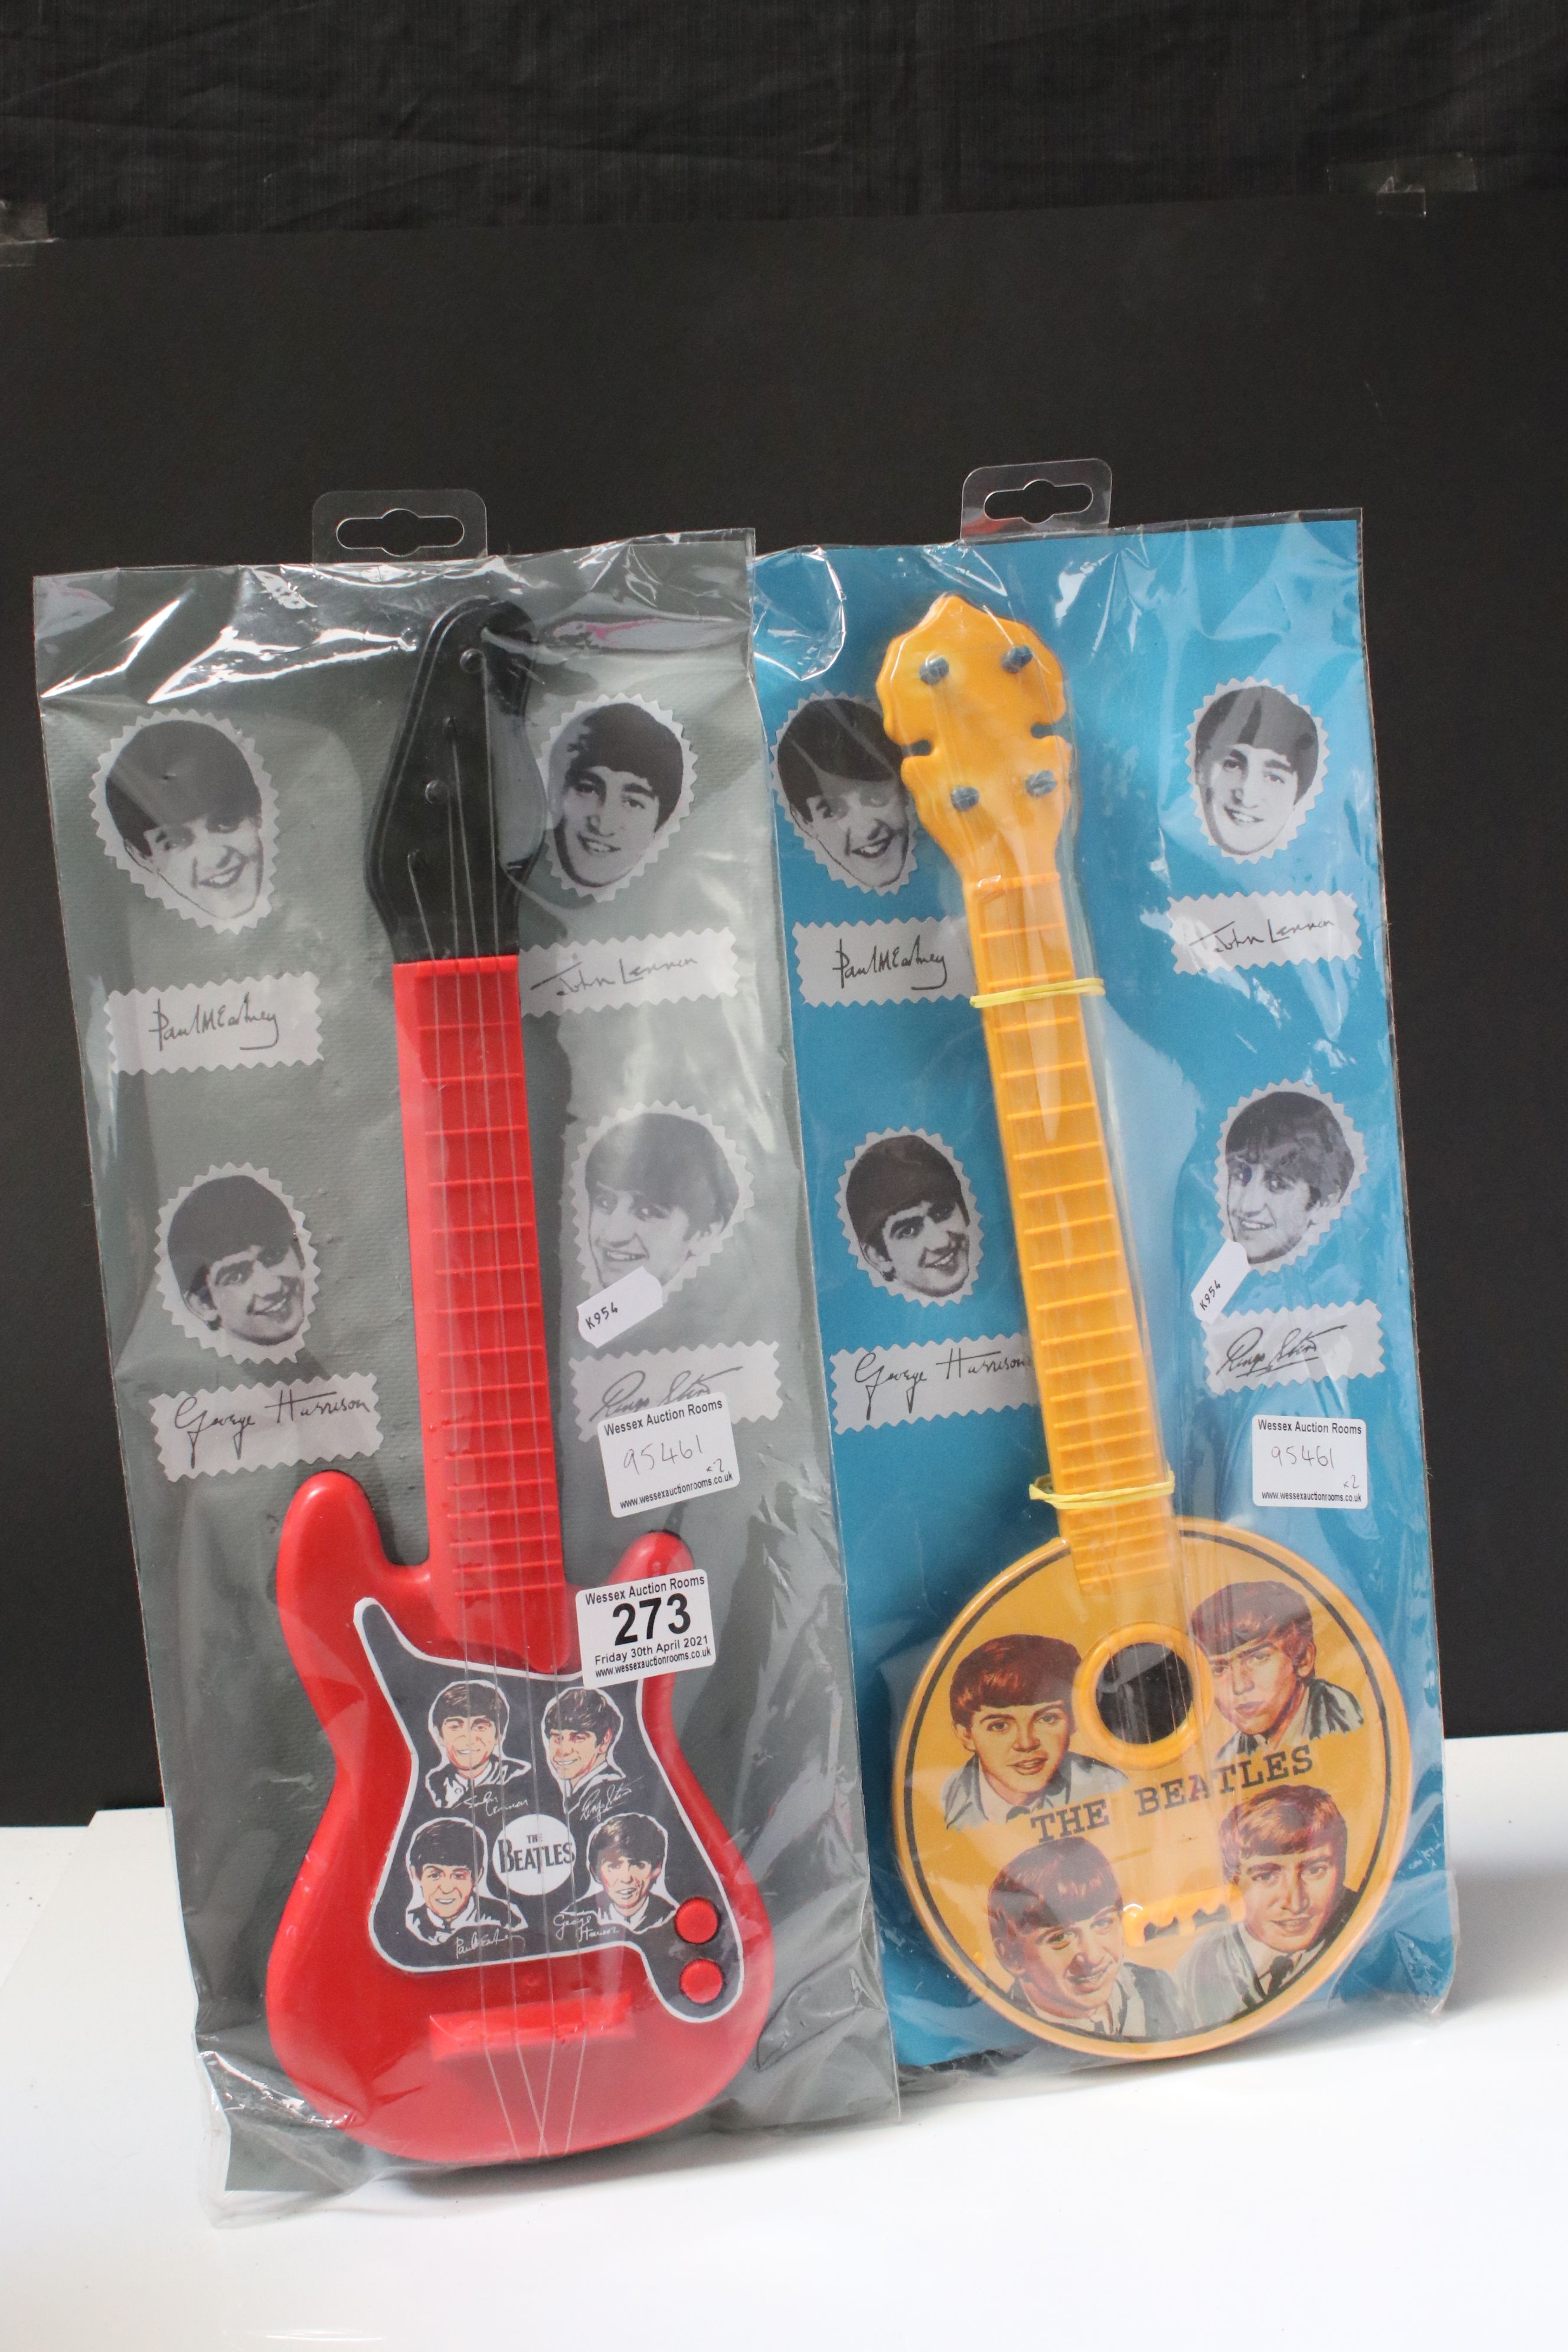 Music Toys - Two 1960s The Beatles plastic toy guitars with original cards within bags, excellent